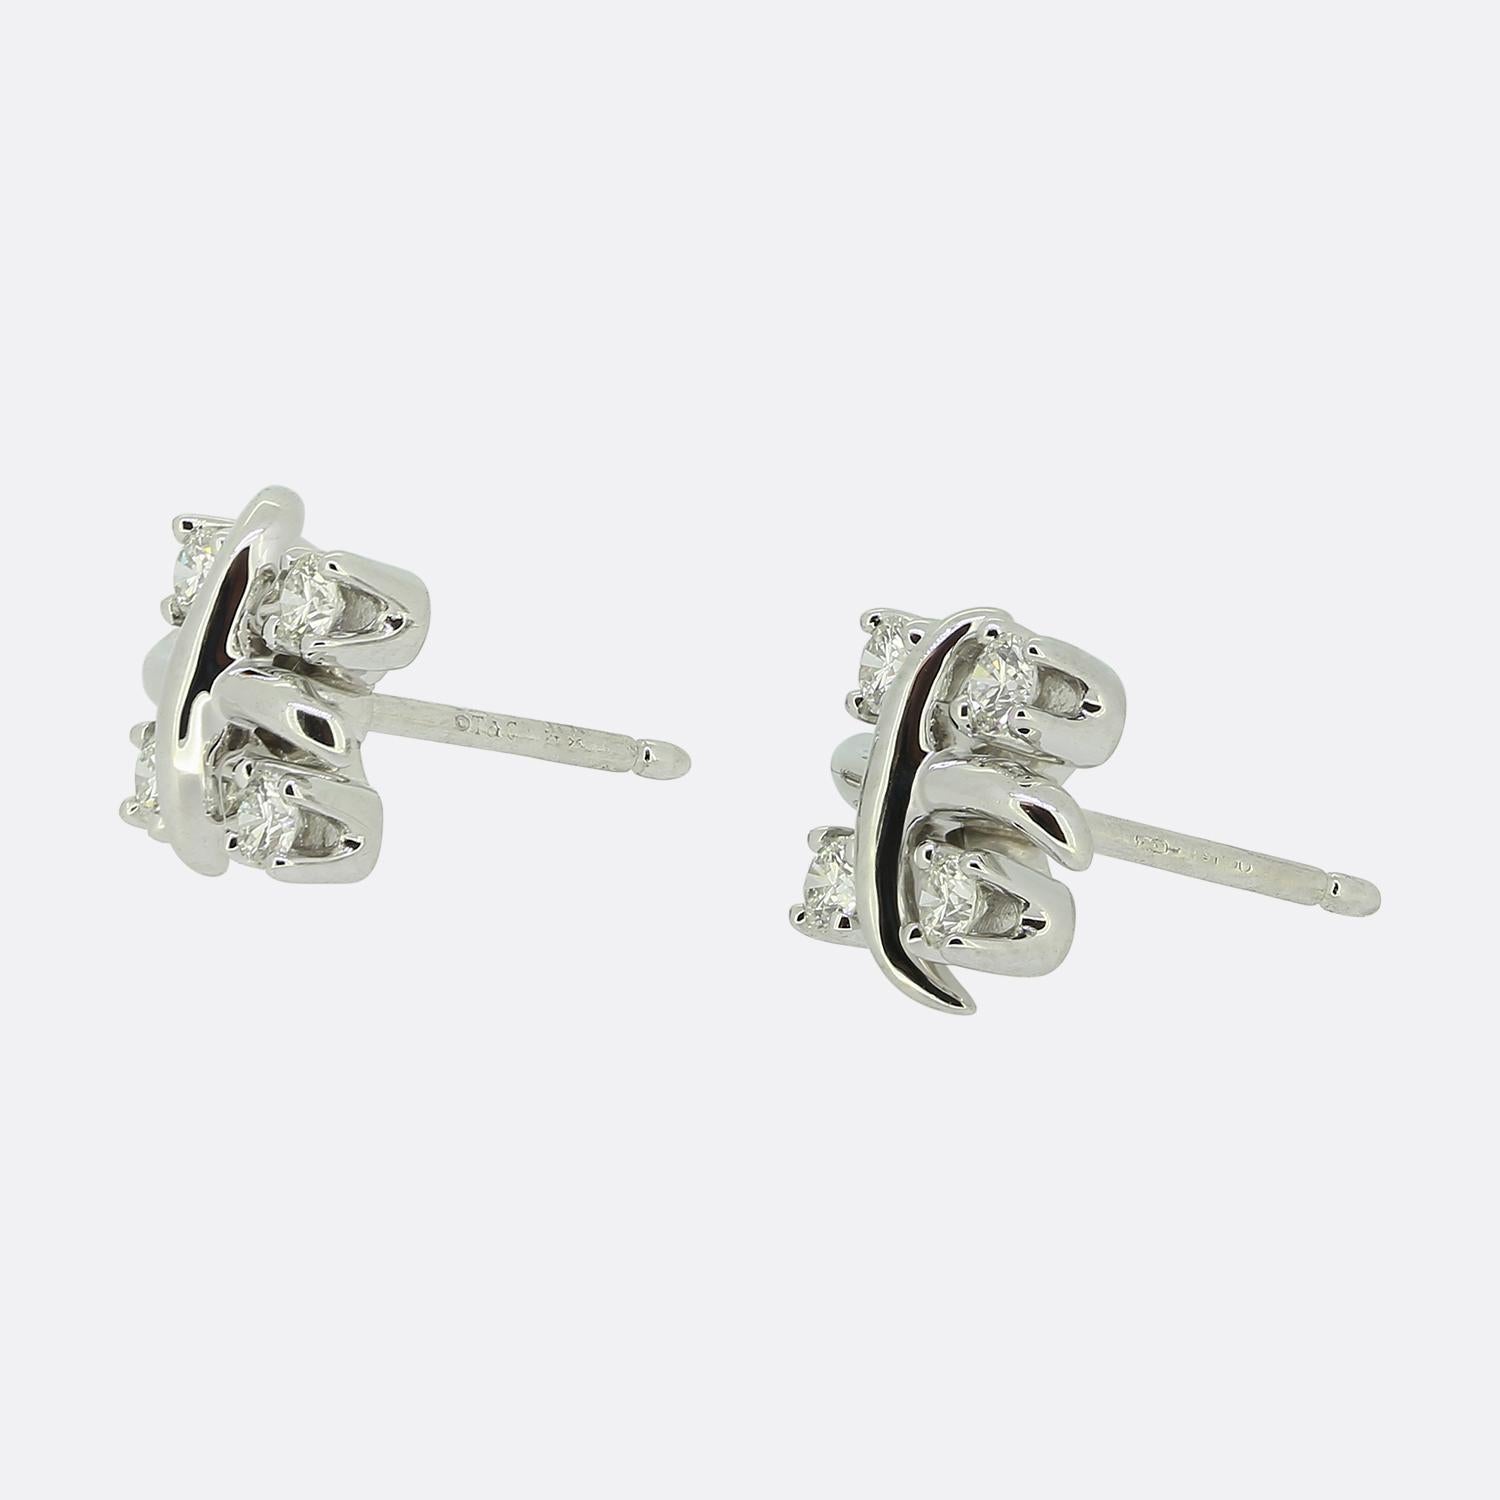 Here we have a stylish pair of diamond earrings from the world renowned jewellery designer, Tiffany & Co. Each piece has been crafted from platinum into the iconic Schlumberger 'X' design with four claw set round brilliant cut diamonds for company.